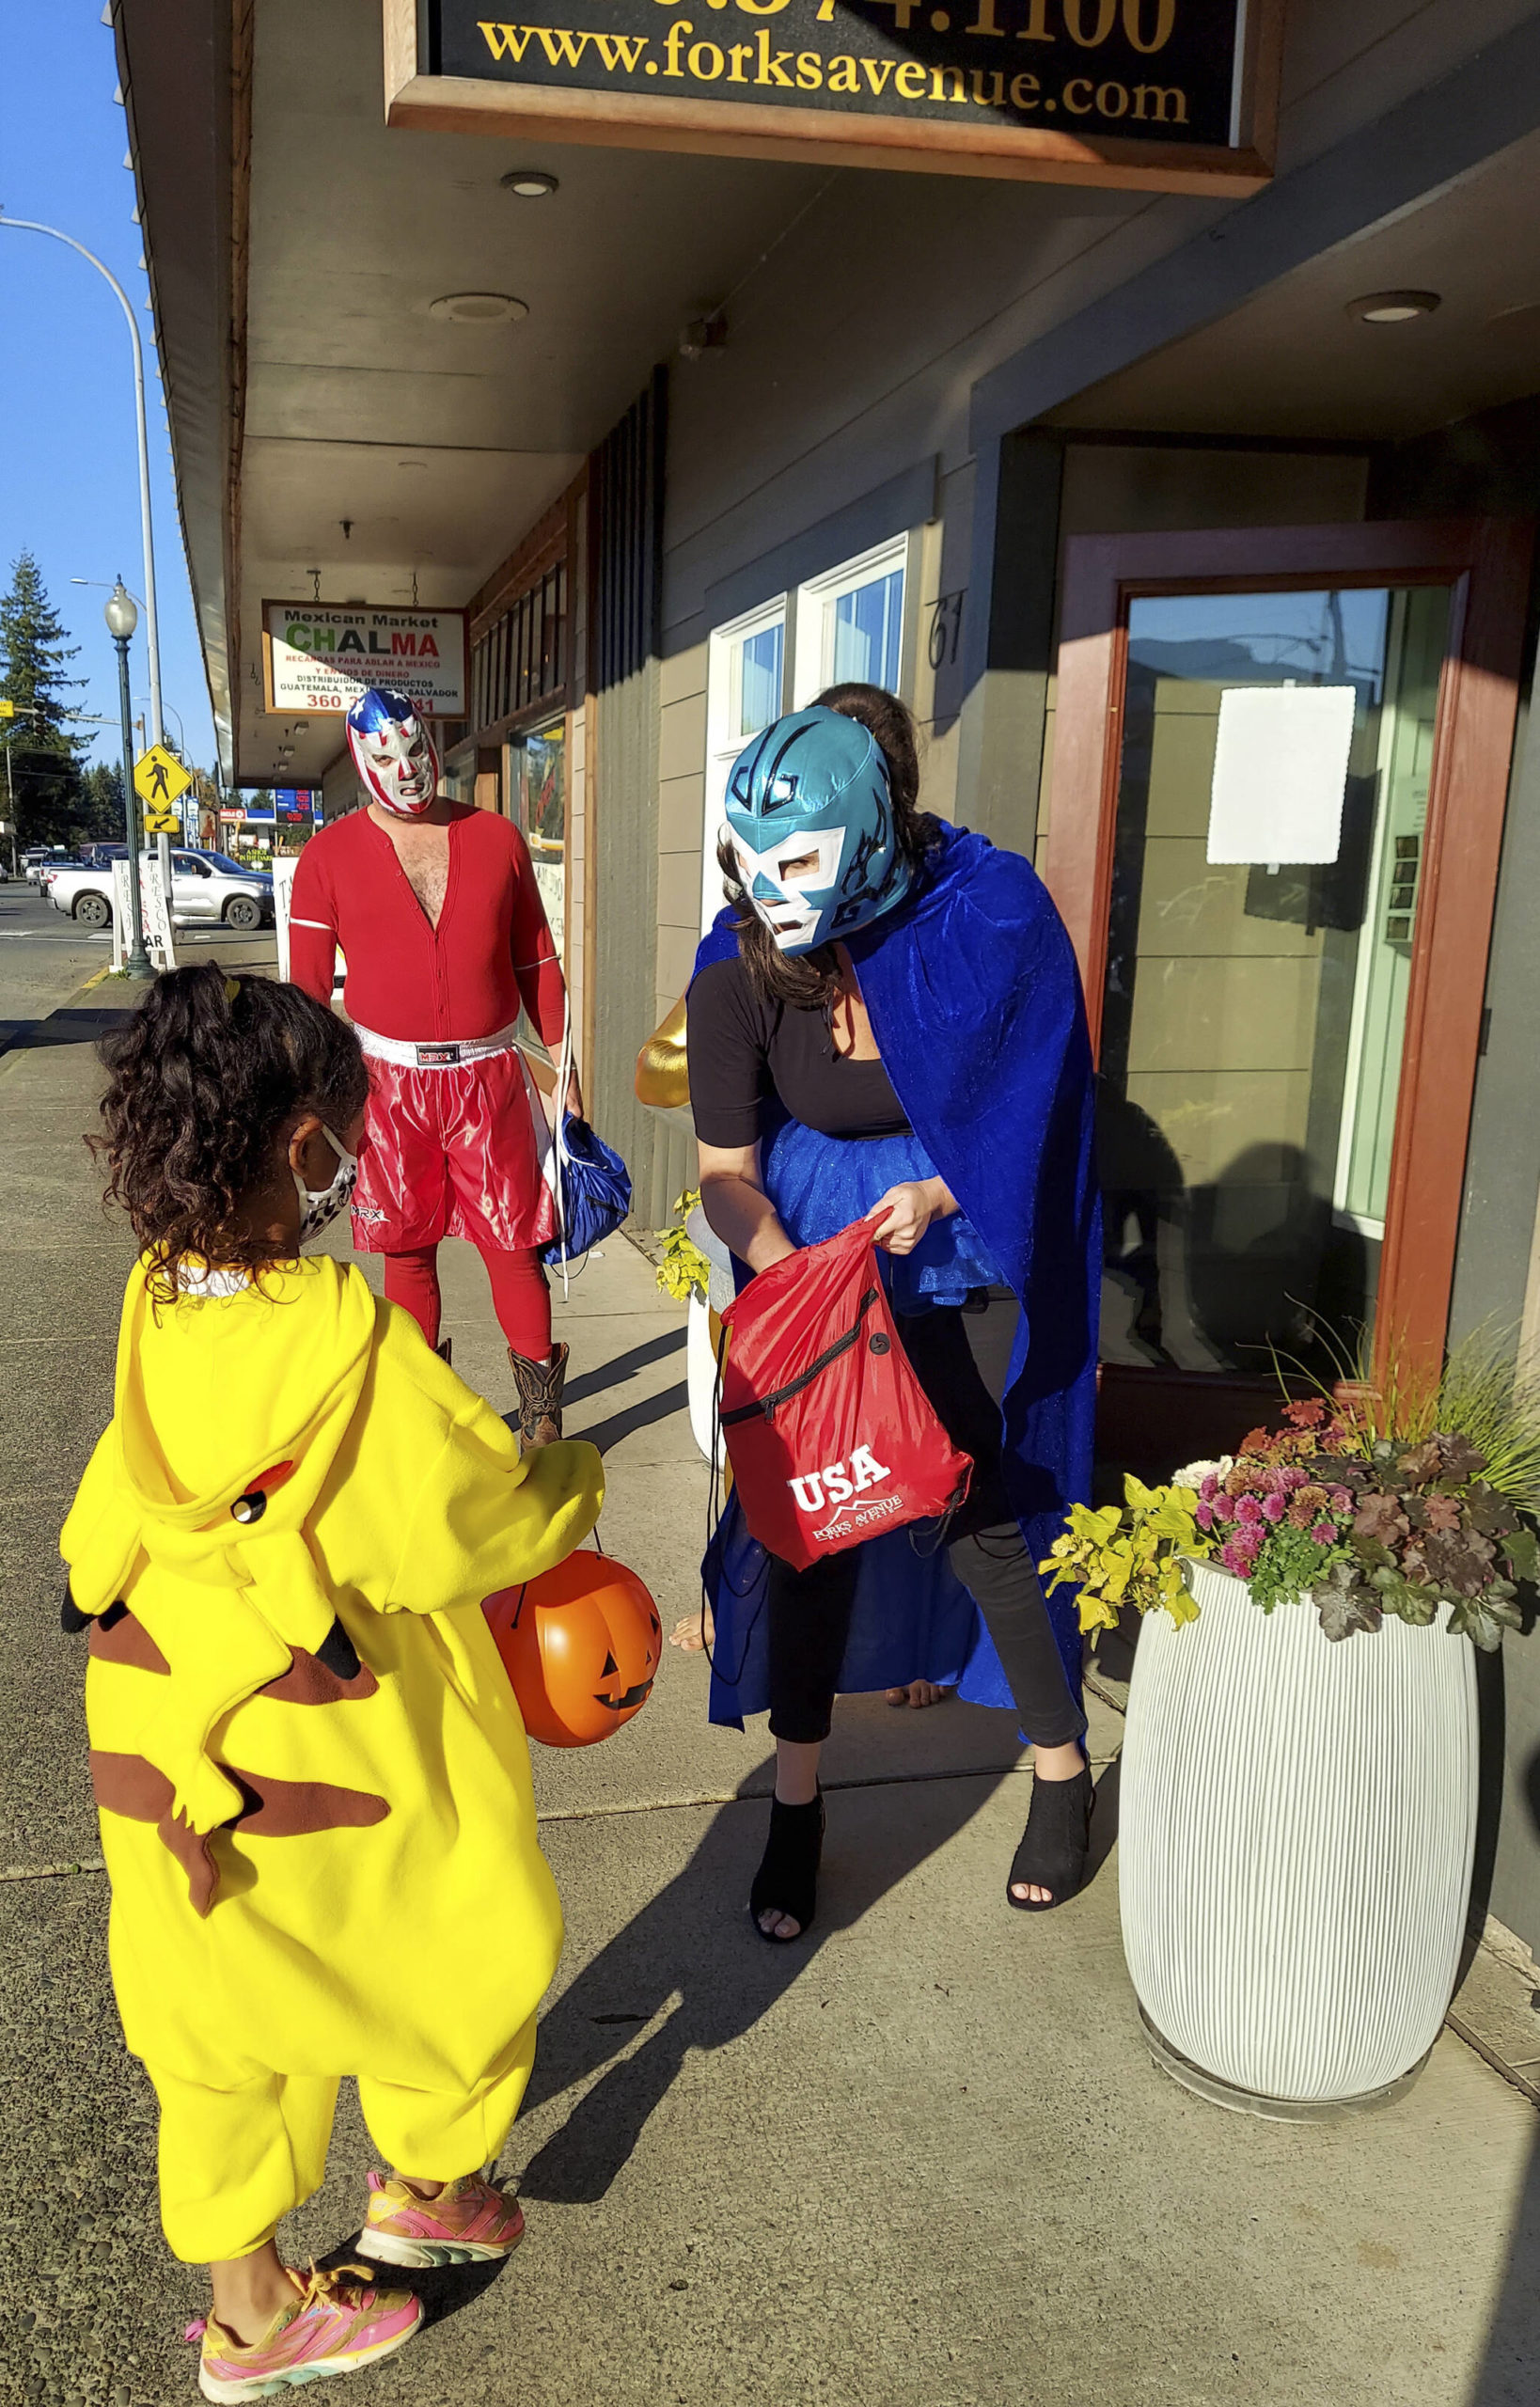 Forks Avenue had some fun wrestlers handing out candy. Submitted Photo